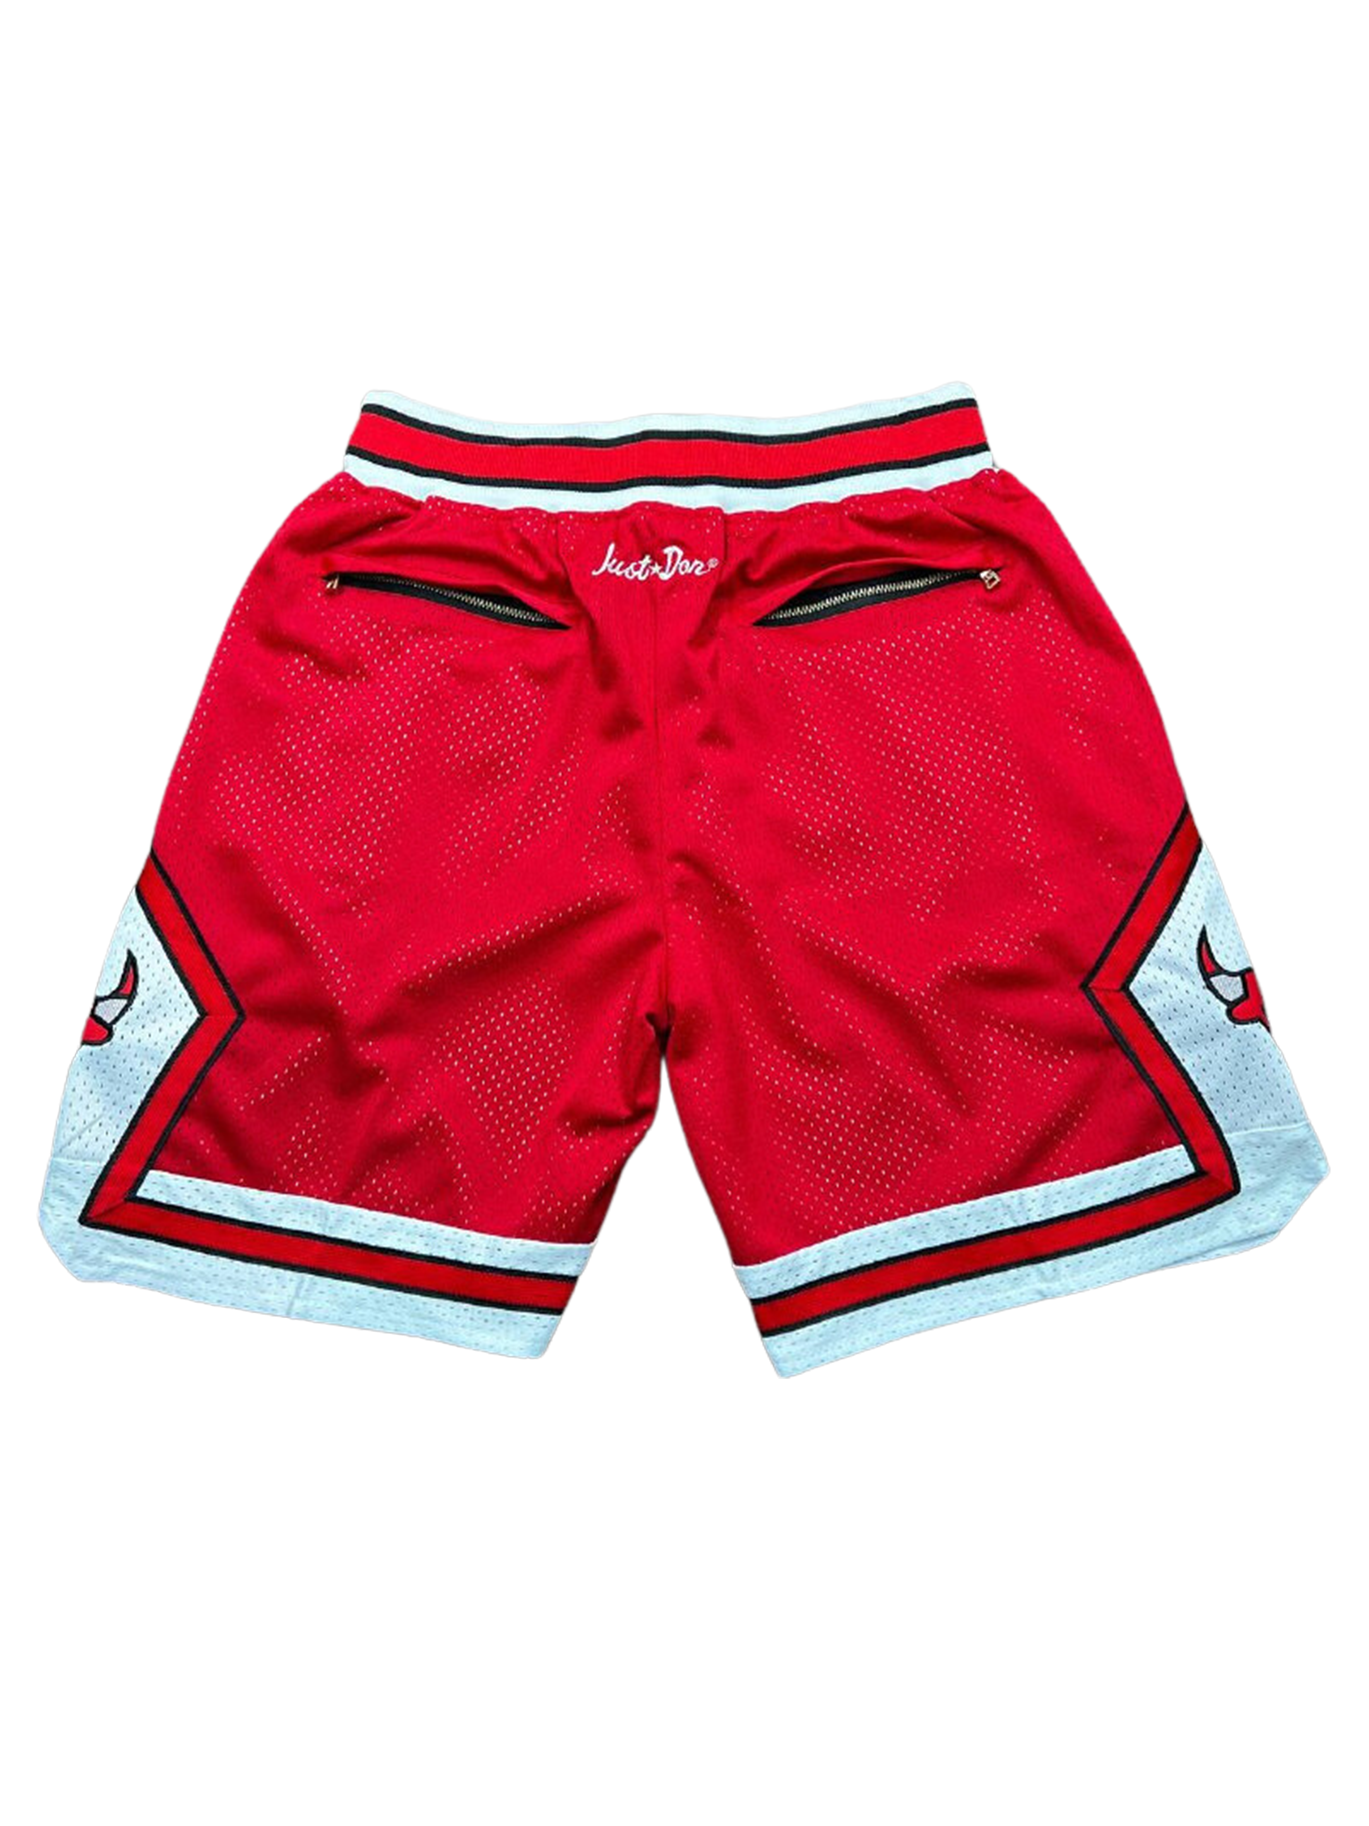 Chicago Bulls Red Shorts Full Embroidery